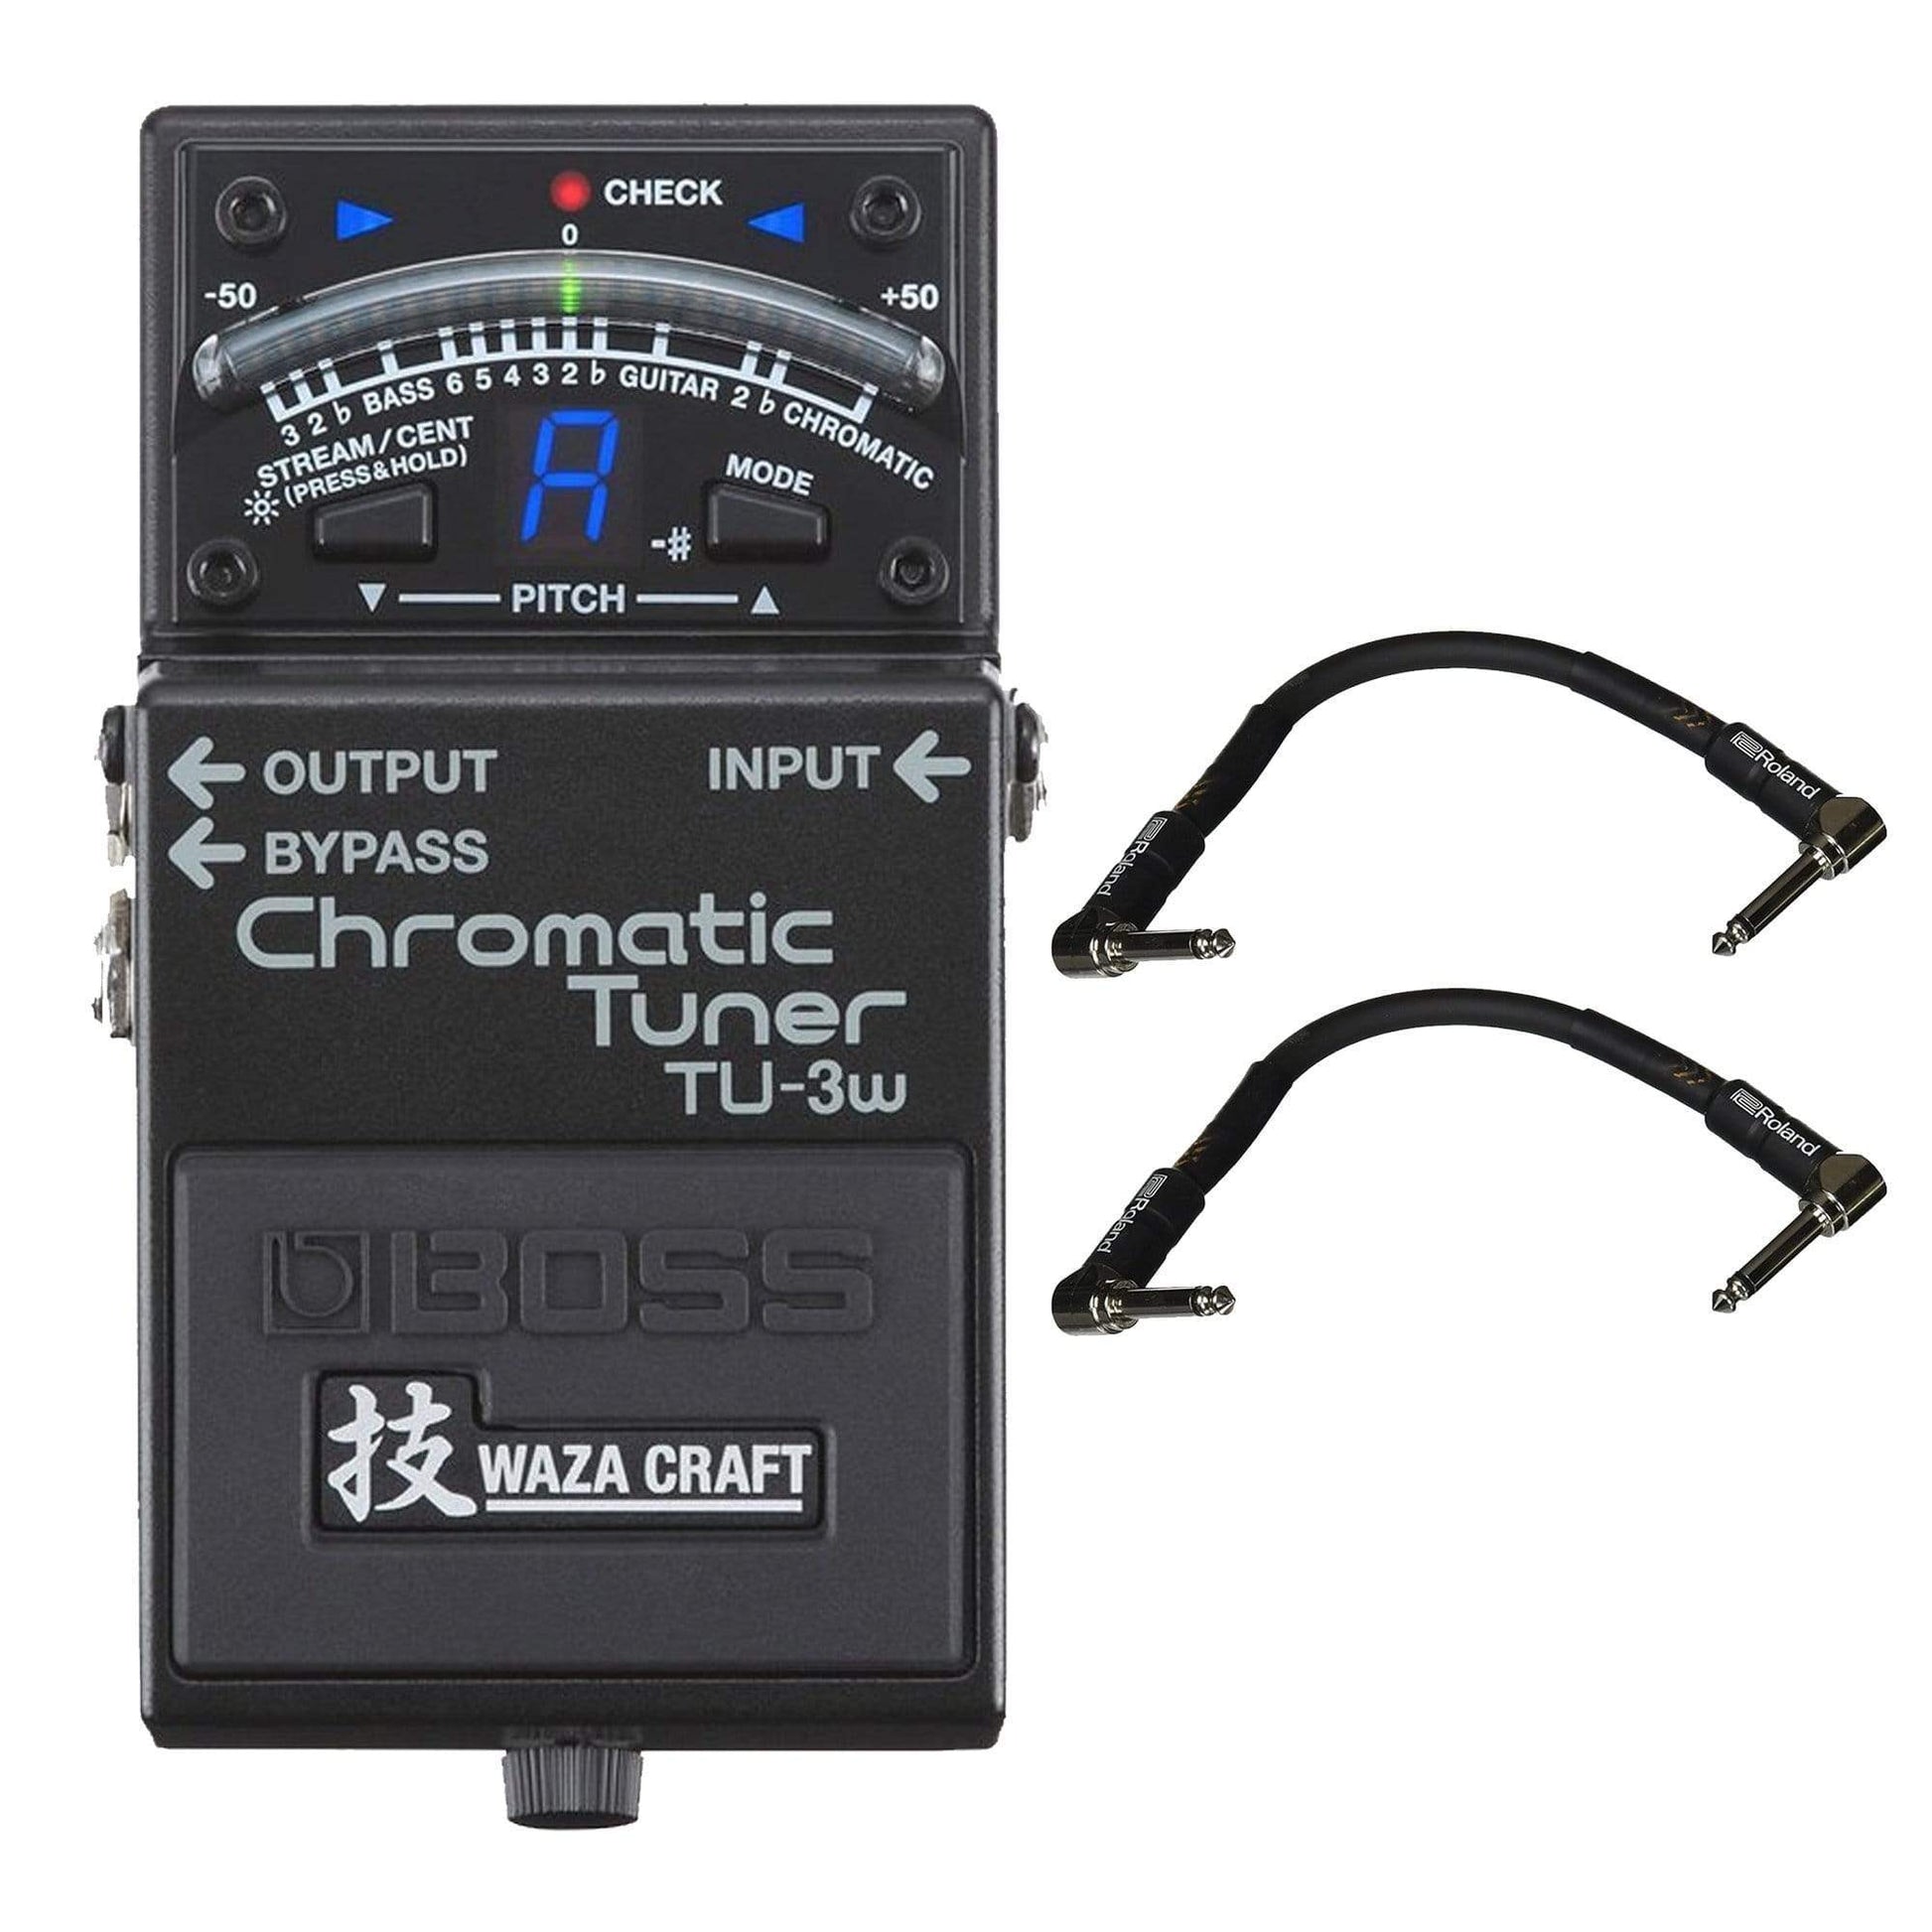 BOSS TU-3W Chromatic Tuner Bundle w/ 2 Roland Black Series 6 inch Patch Cables Effects and Pedals / Tuning Pedals